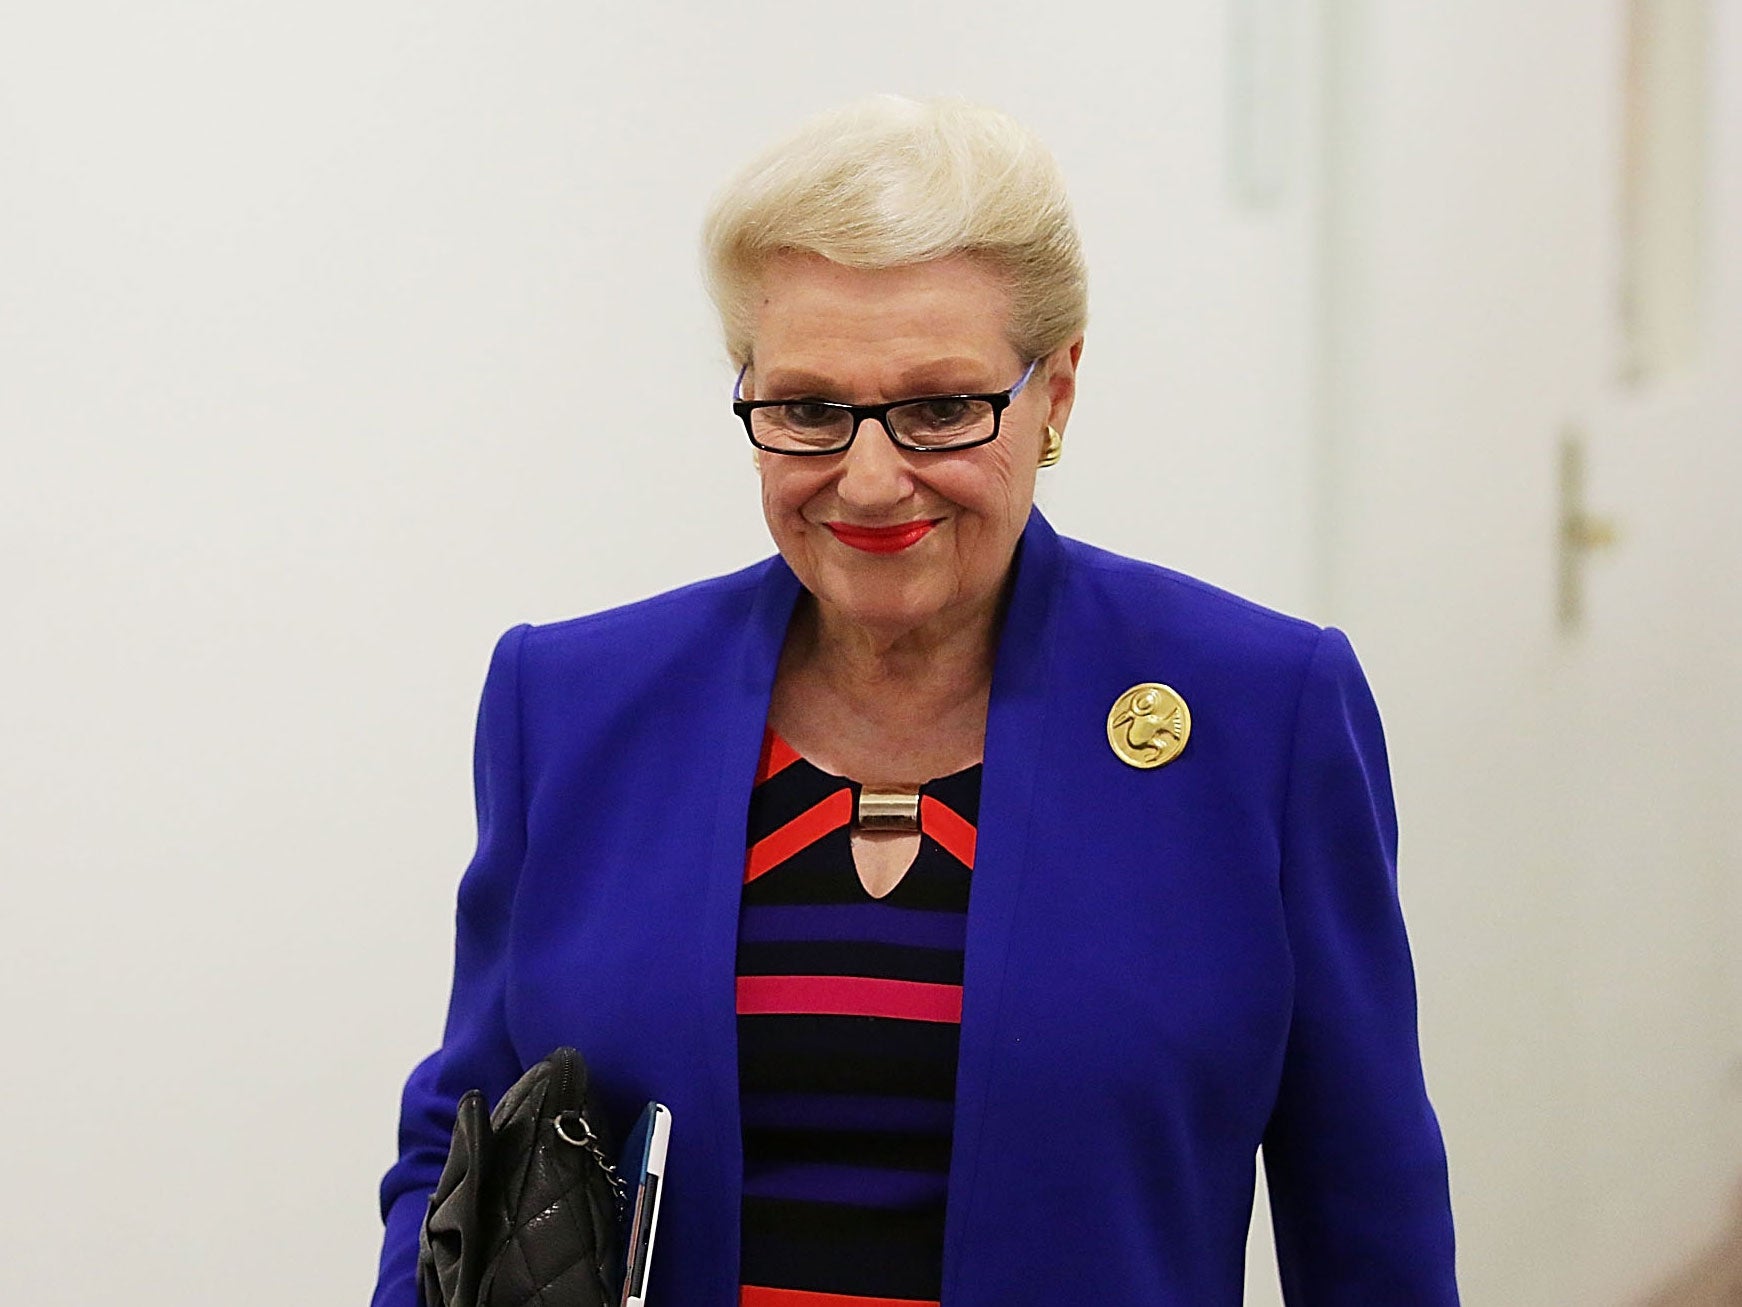 Bishop has faced severe criticism after it emerged last month that she spent over AU$ 5,000 on a helicopter journey